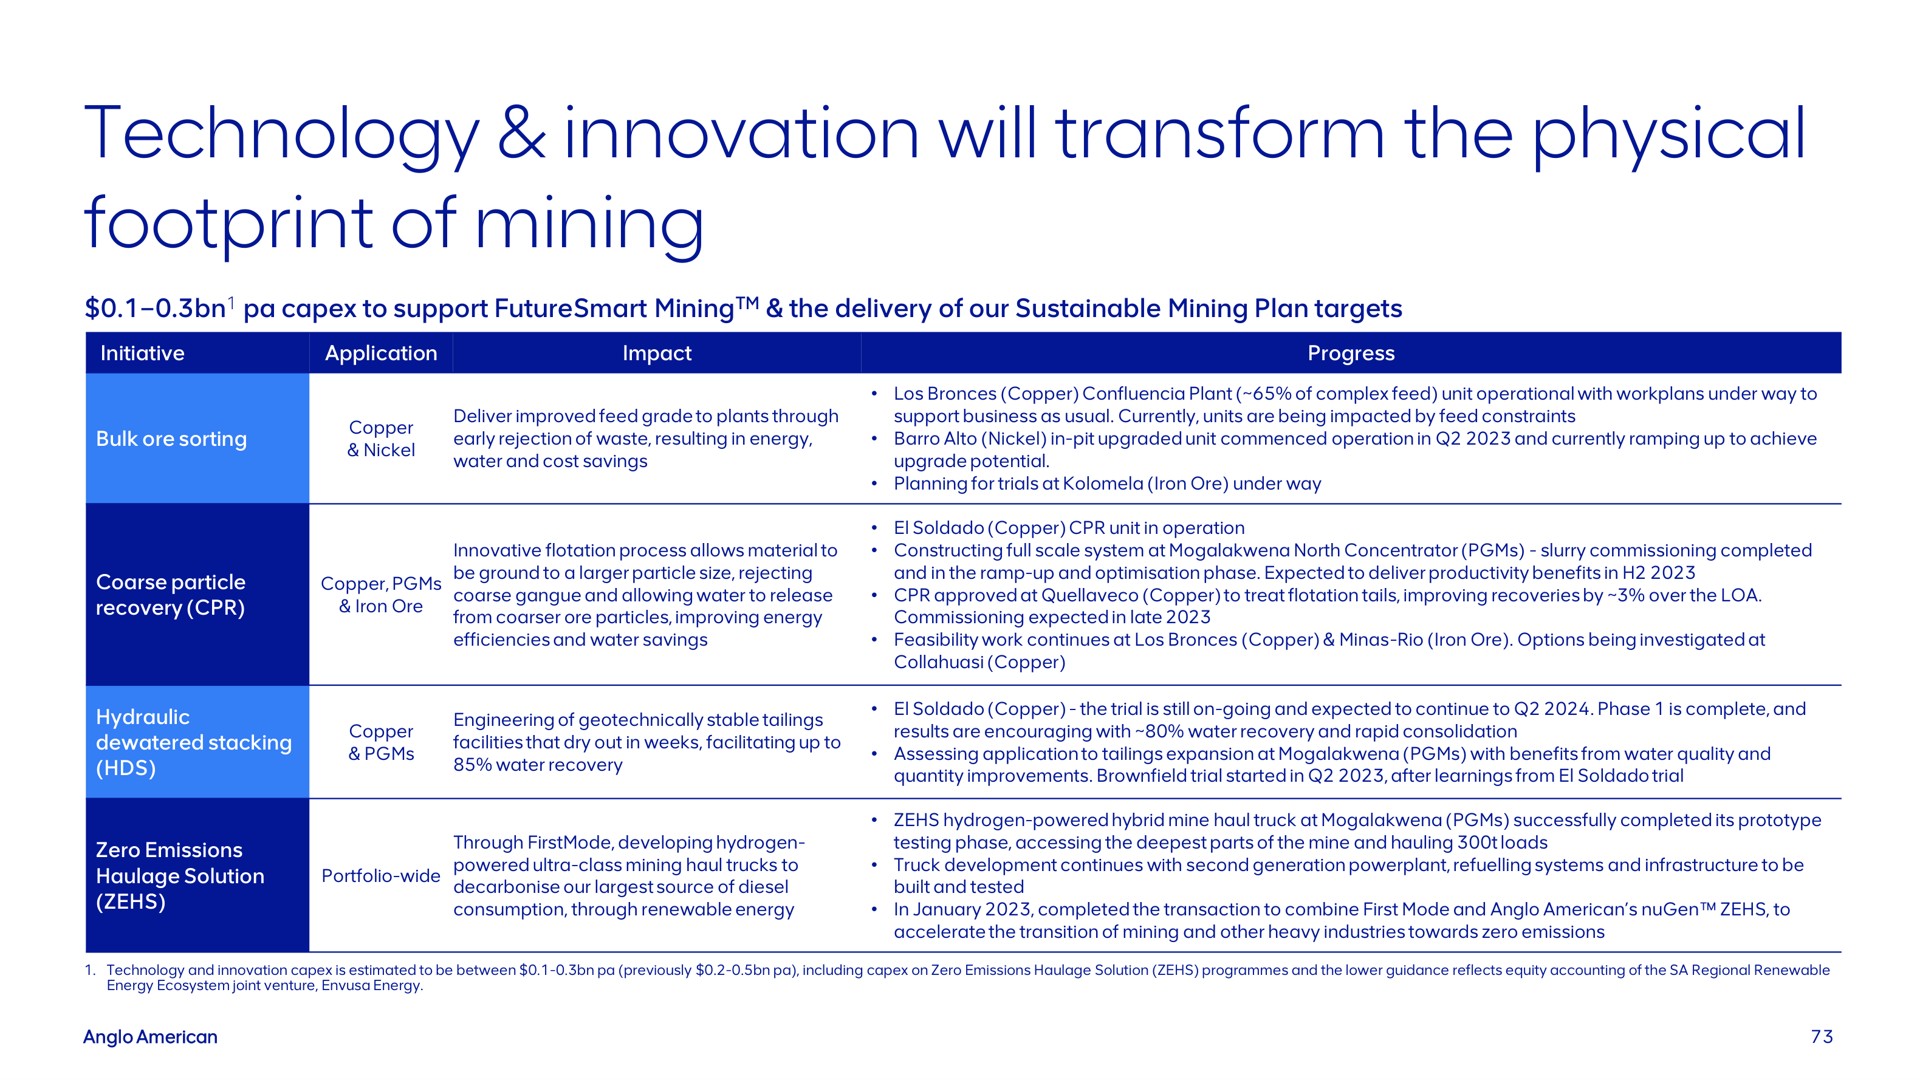 technology innovation will transform the physical footprint of mining | AngloAmerican